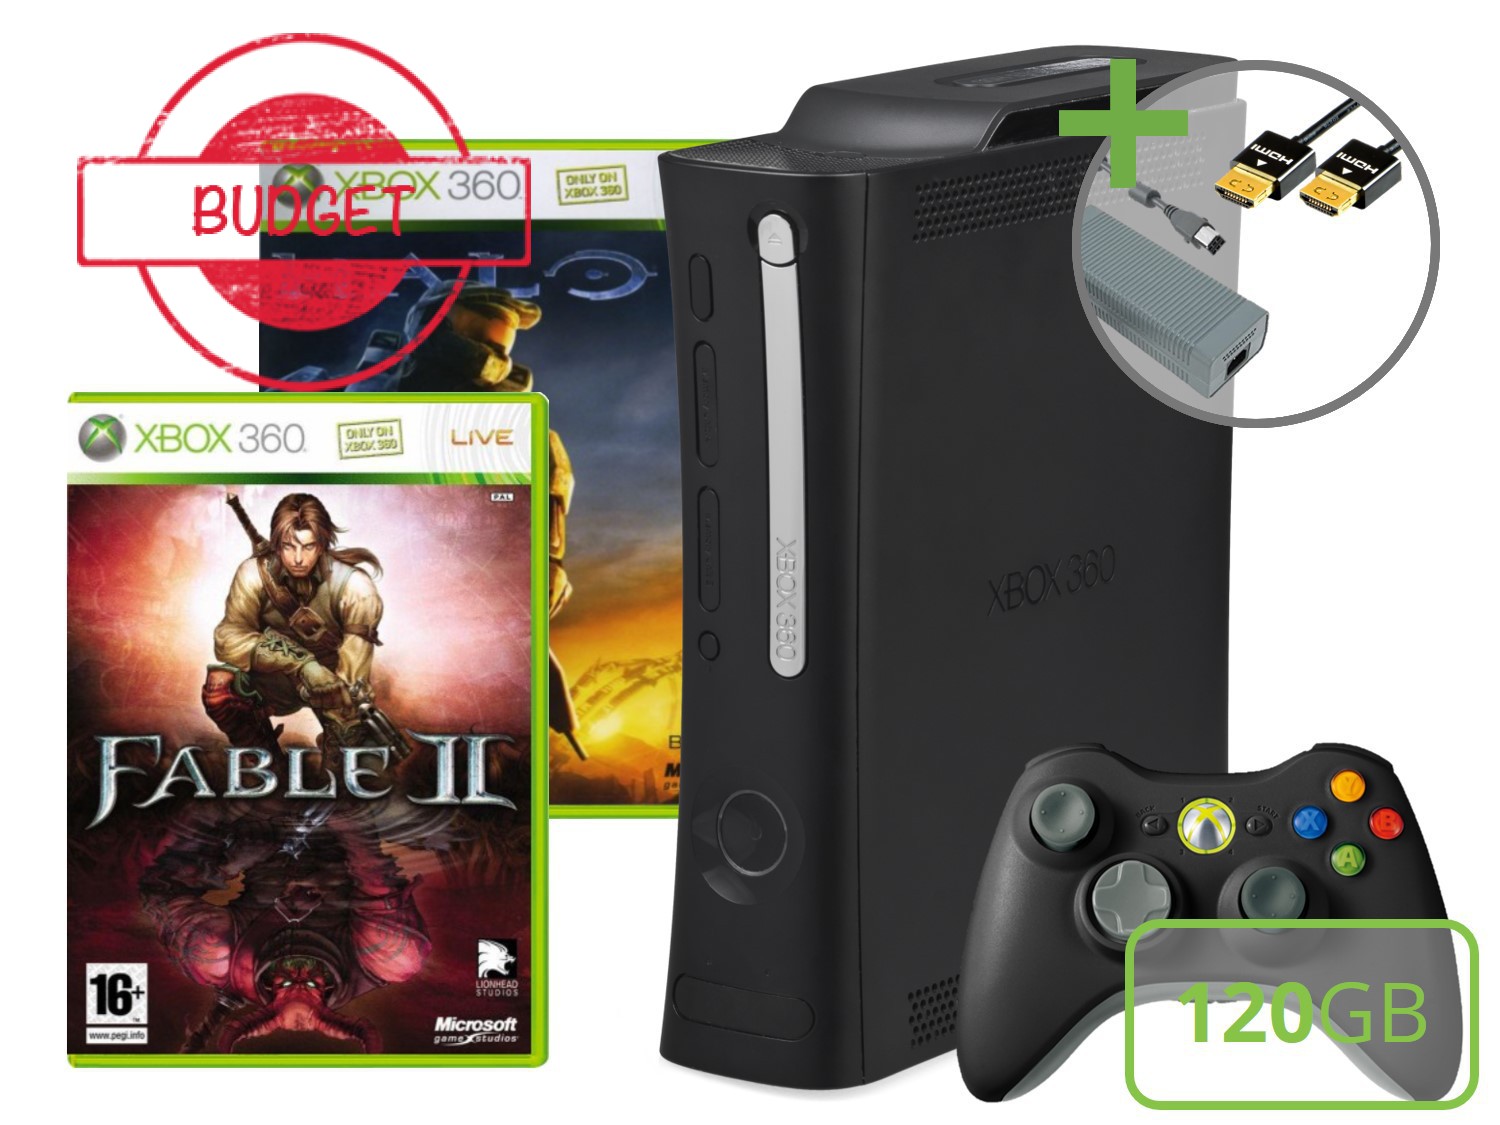 Microsoft Xbox 360 Elite Starter Pack - Fable II and Halo 3 Edition - Budget Kopen | Xbox 360 Hardware